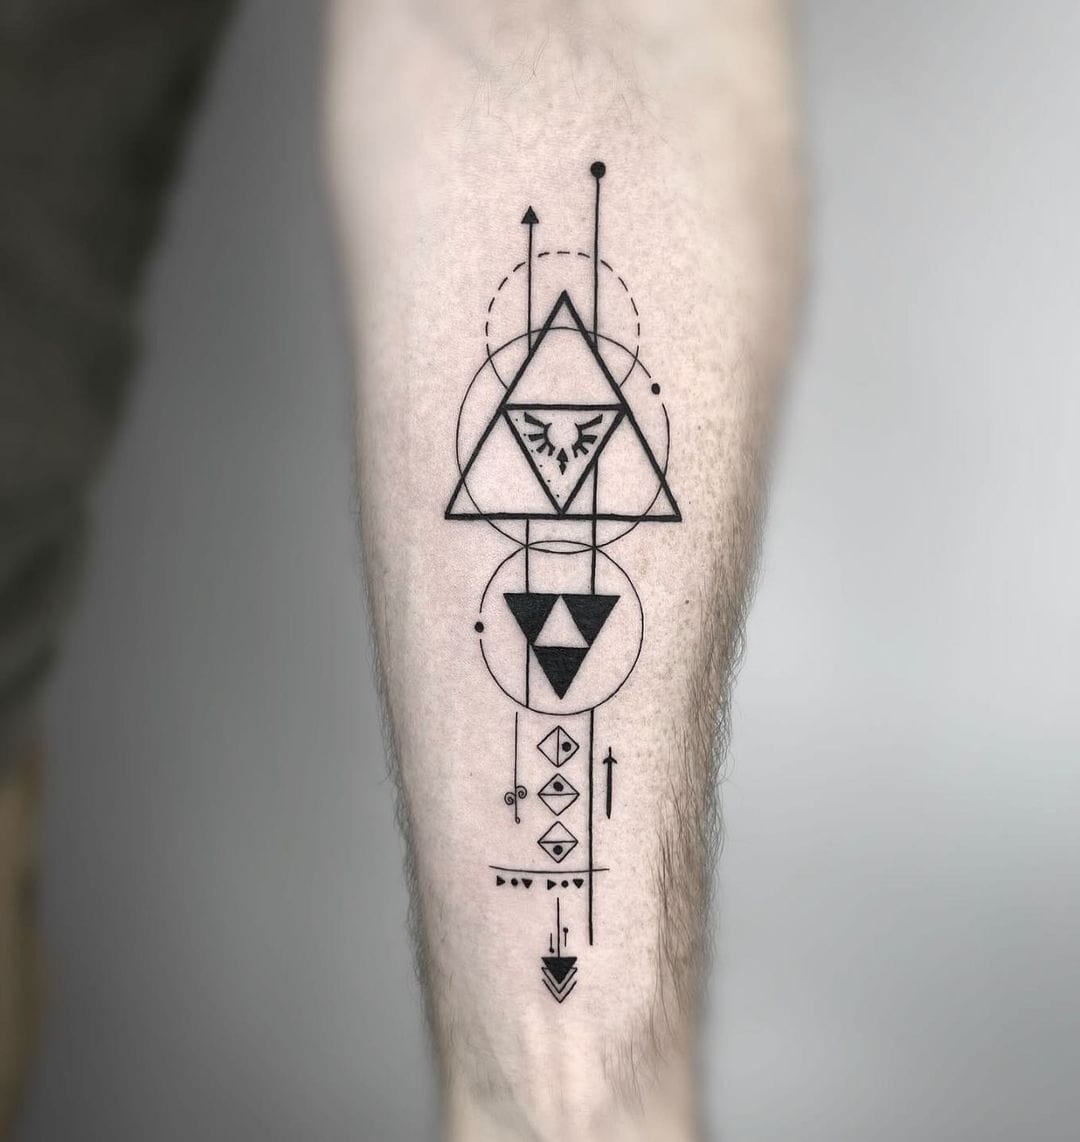 50 Playstation Tattoo Designs For Men - Video Game Ink Ideas | Playstation  tattoo, Gamer tattoos, Gaming tattoo